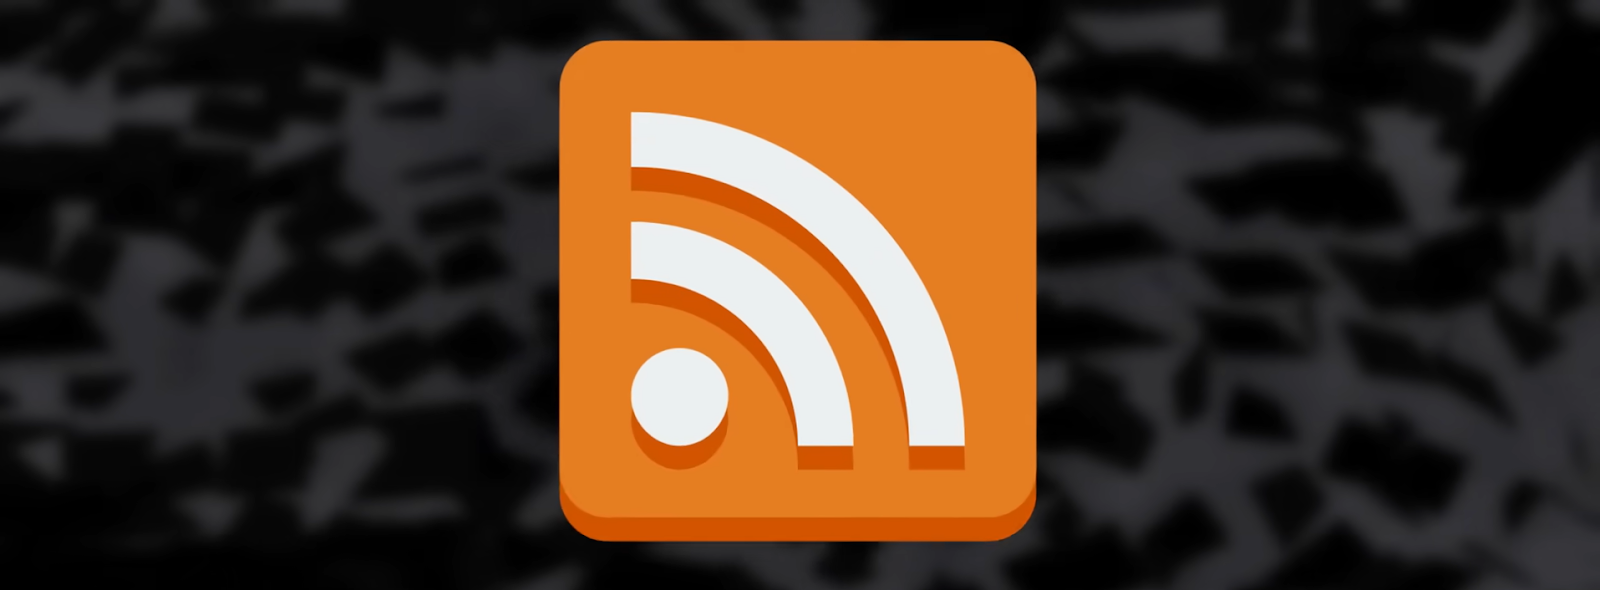 RSS Tutorial – How to Subscribe to RSS Feeds